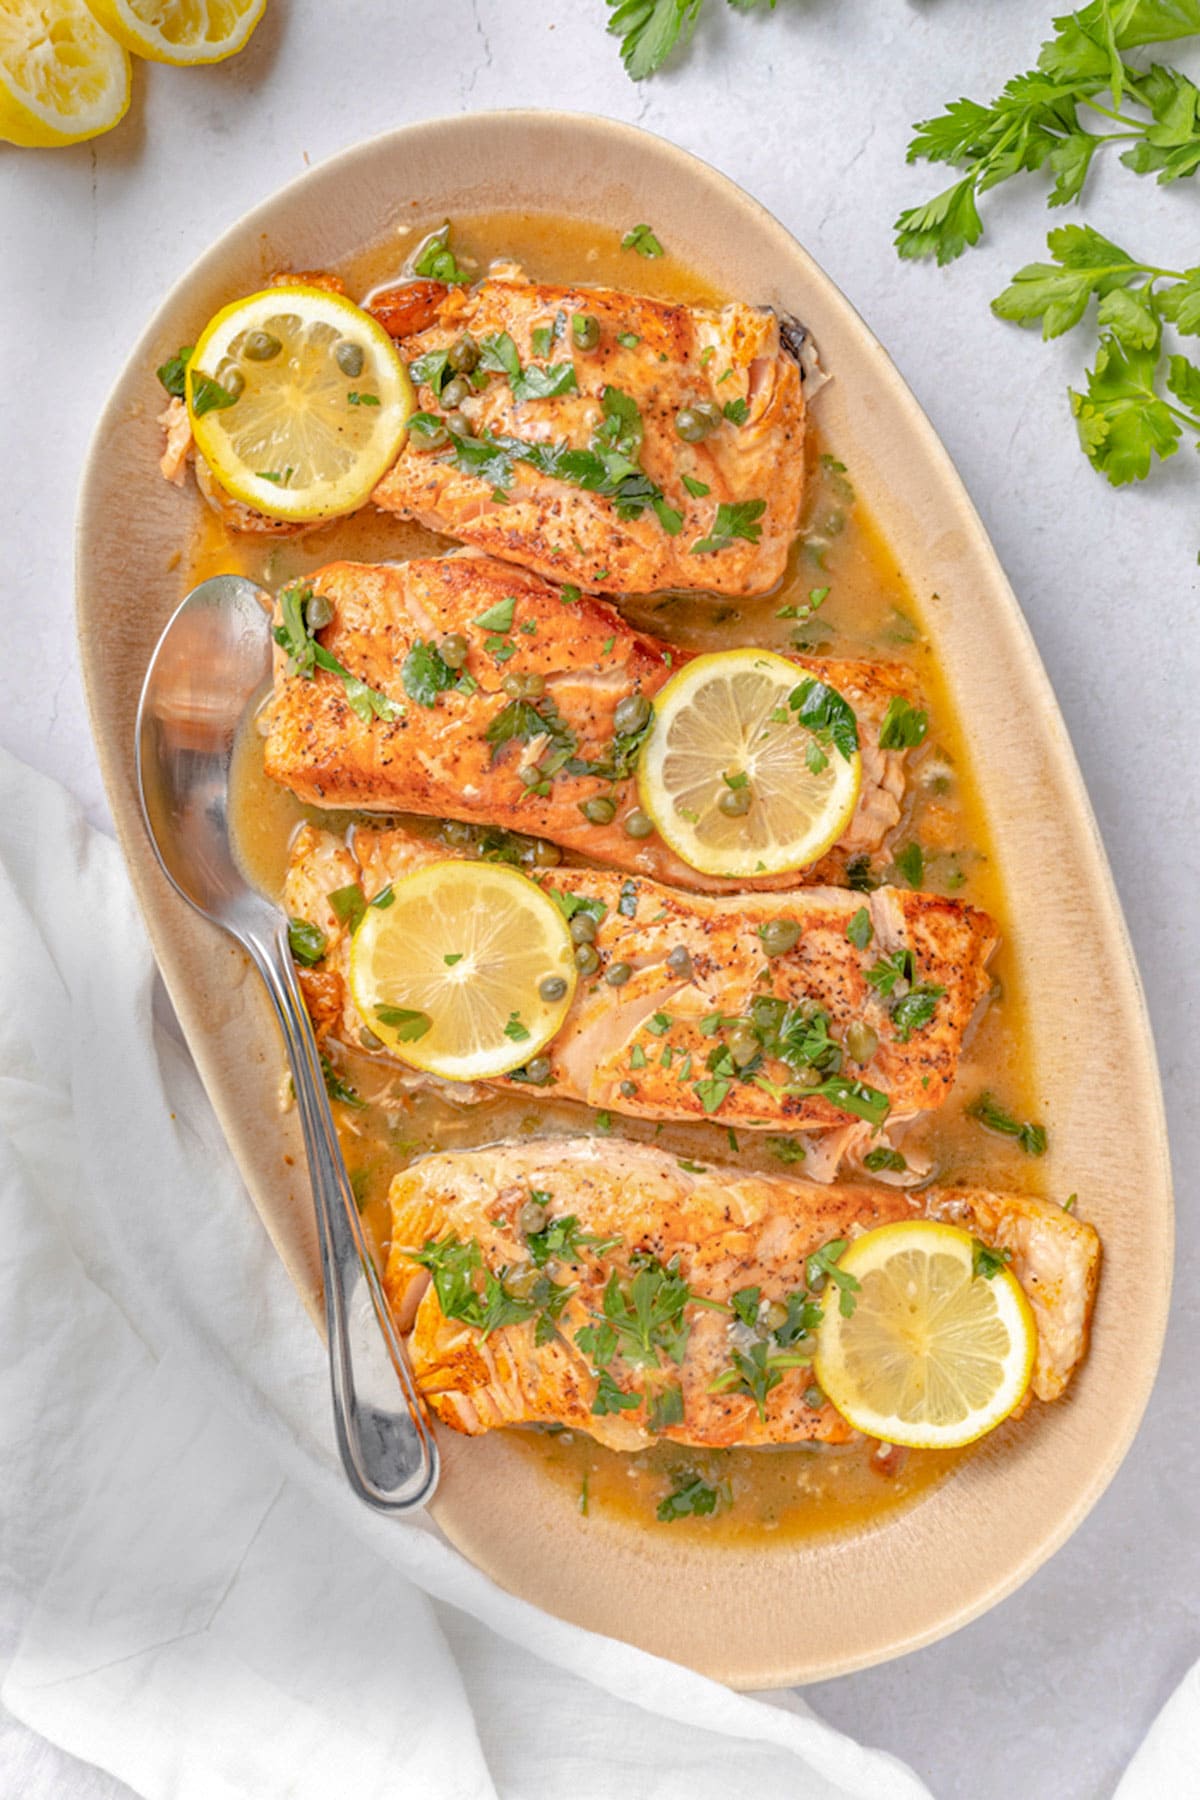 4 salmon piccata fillets on an oval serving platter.